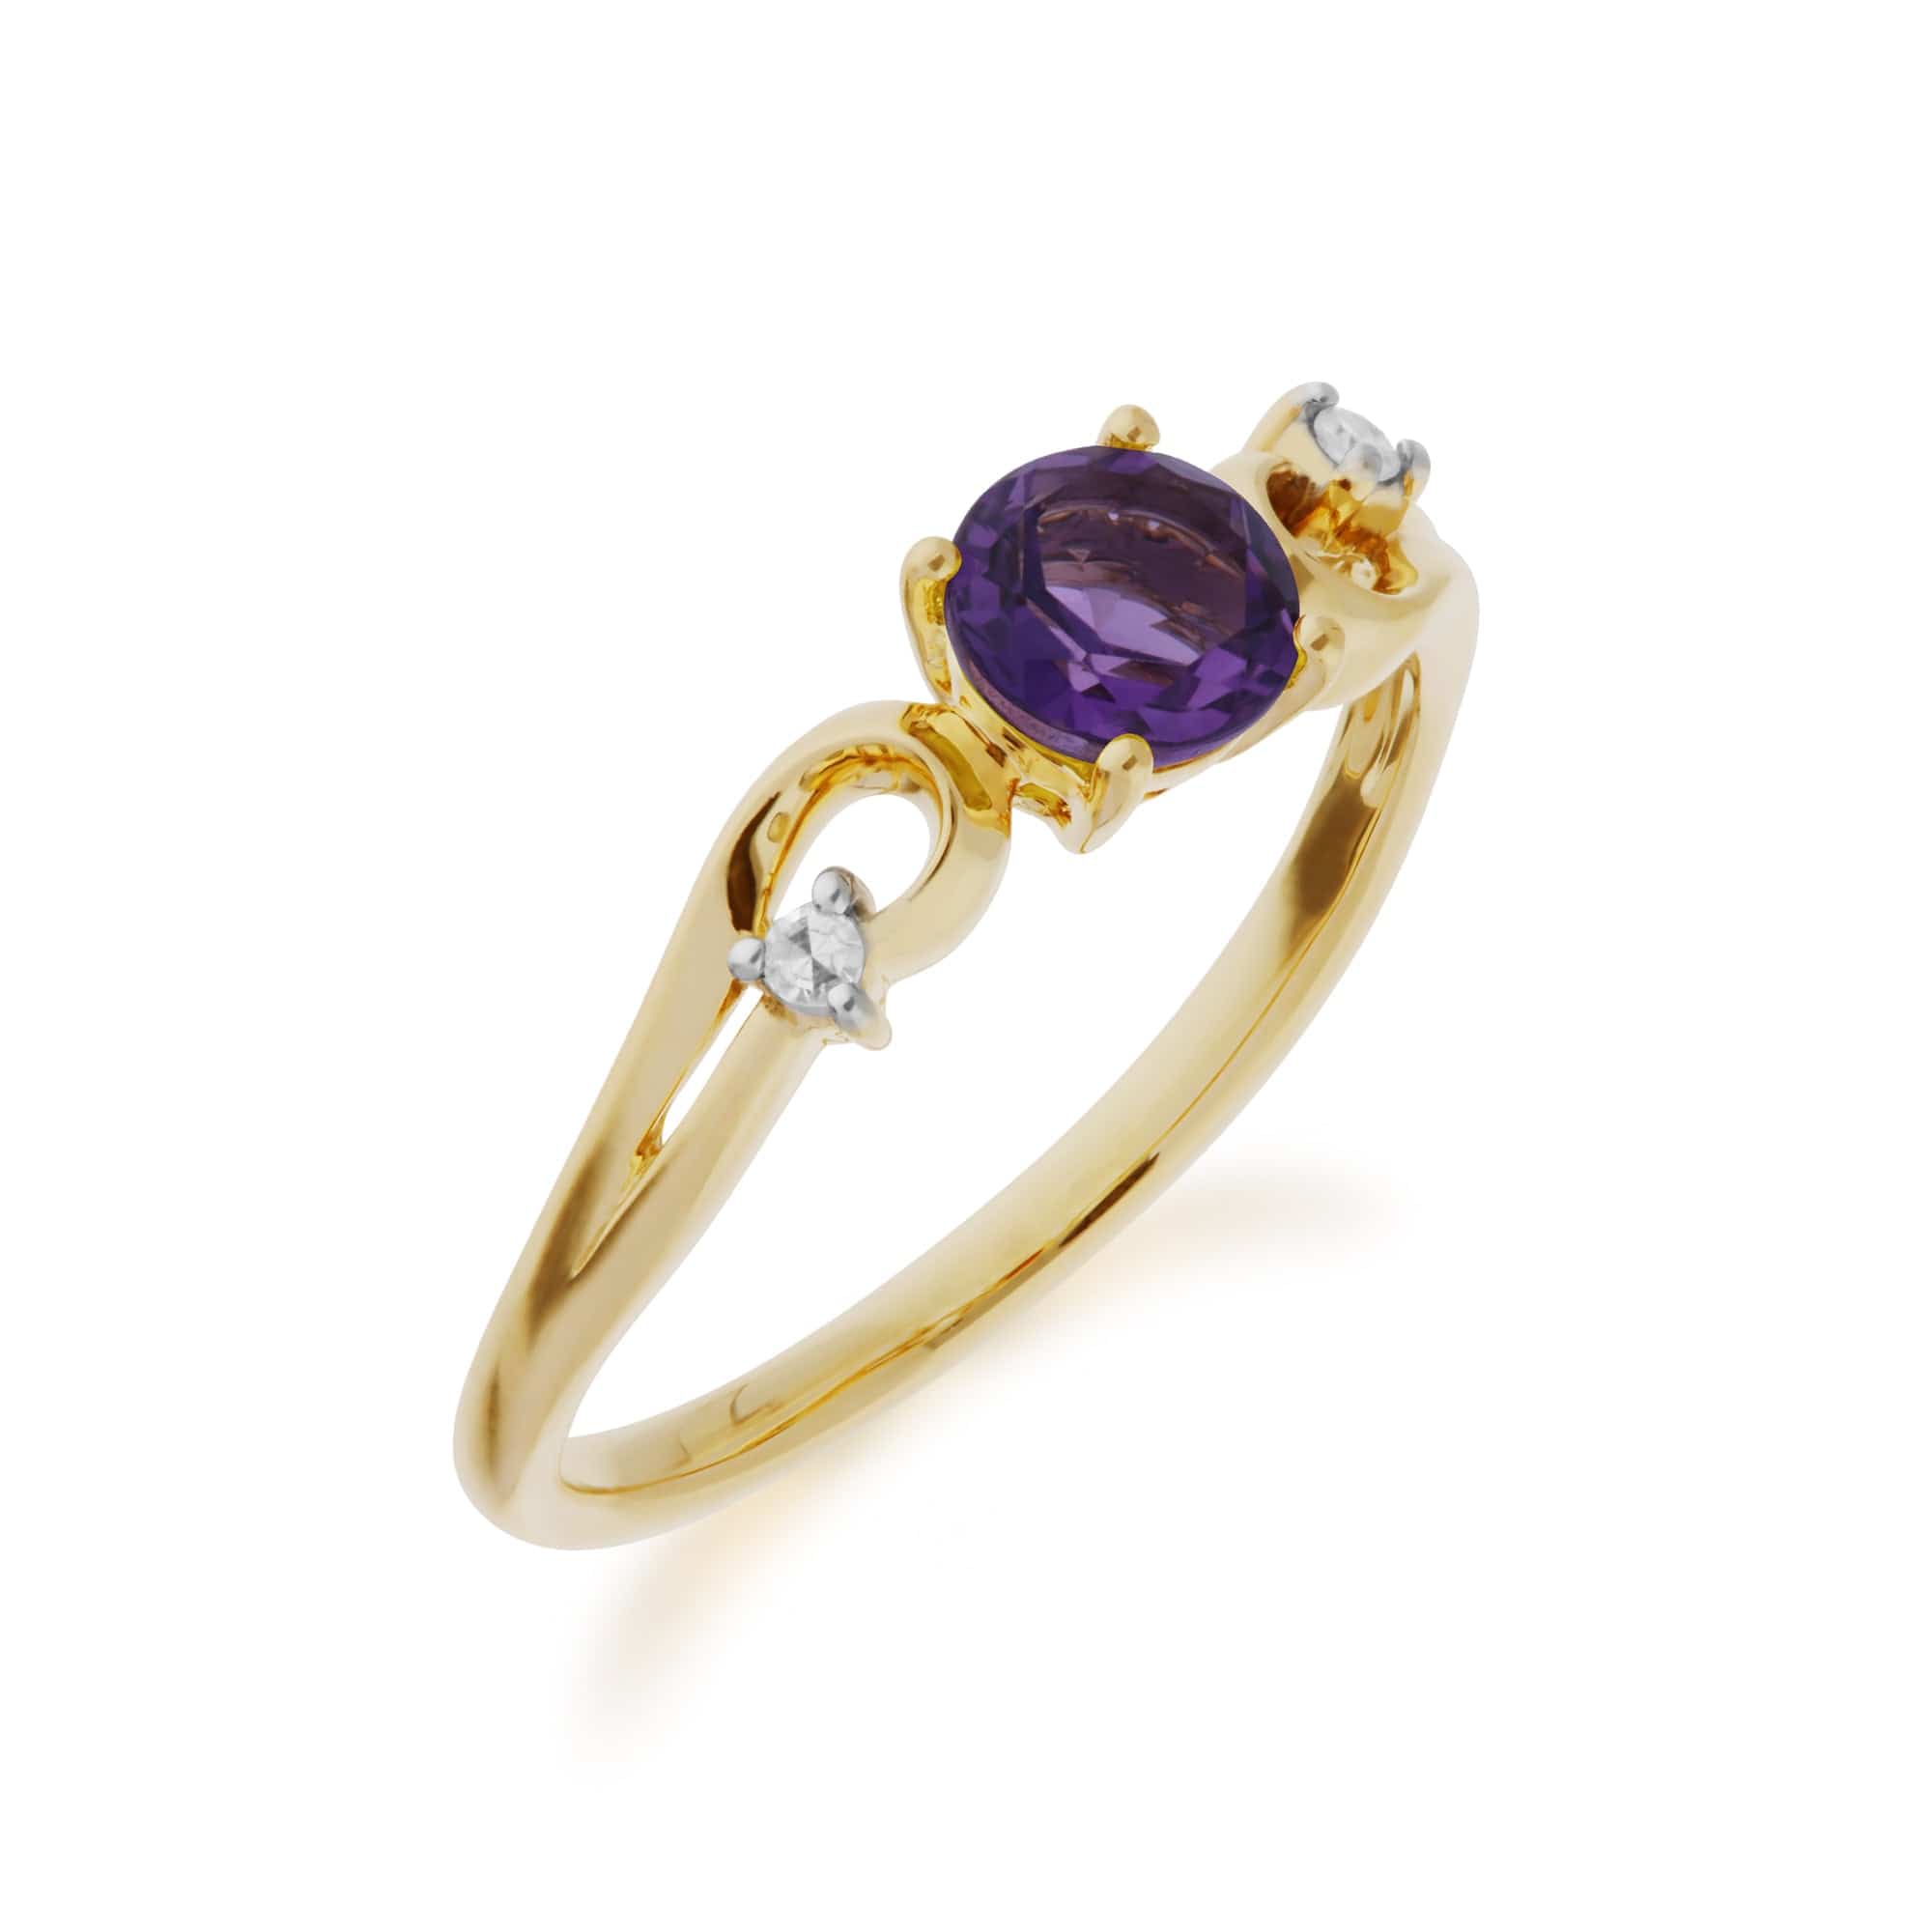 135R1742019 Classic Round Amethyst & Diamond Ring in 9ct Yellow Gold 2